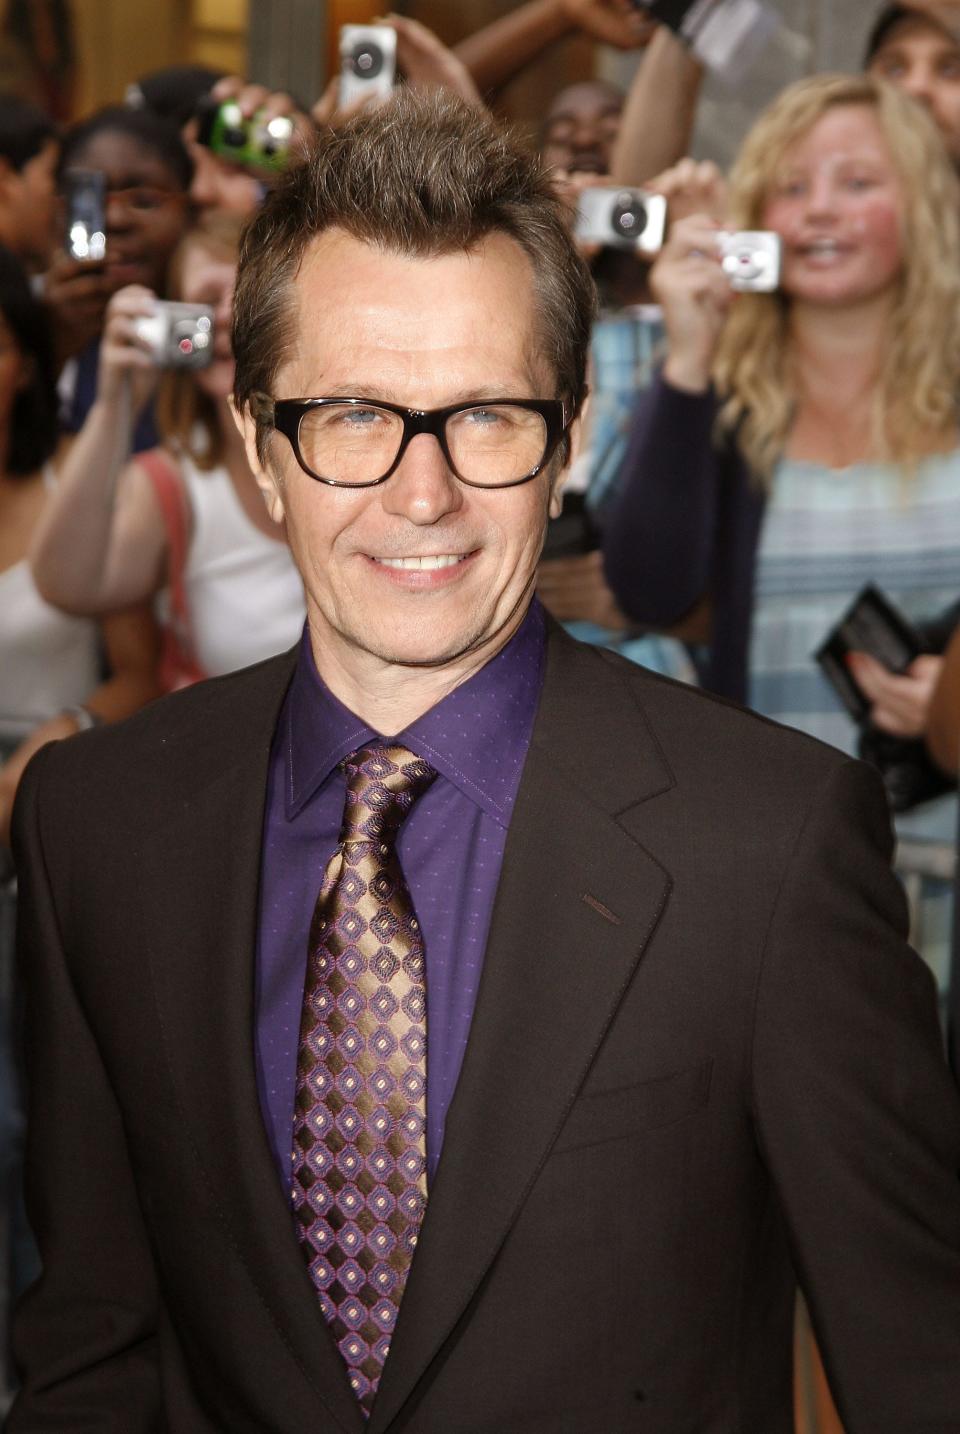 Gary Oldman in a dark suit and tie